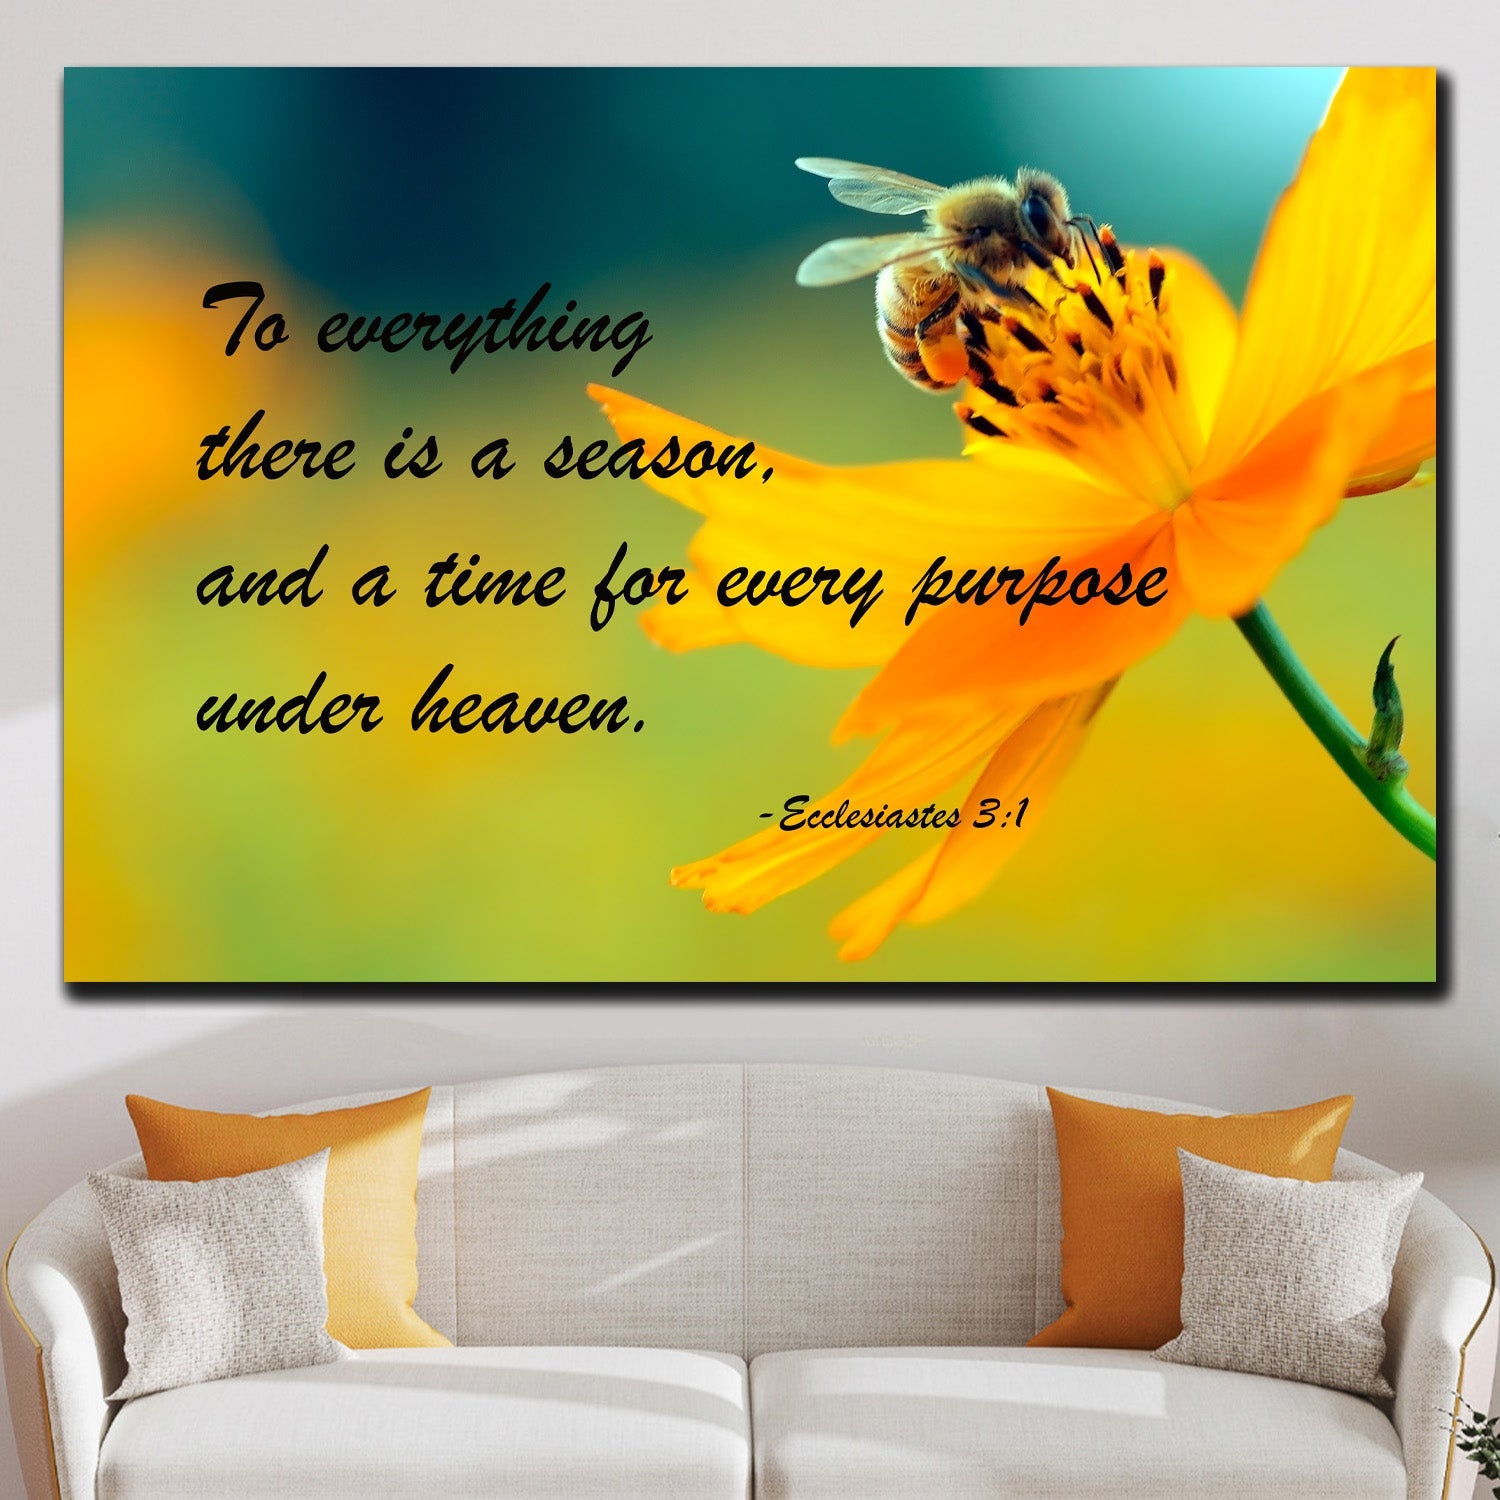 https://cdn.shopify.com/s/files/1/0387/9986/8044/products/BibleQuoteEcclesiastes3_1CanvasArtprintStretched-2.jpg